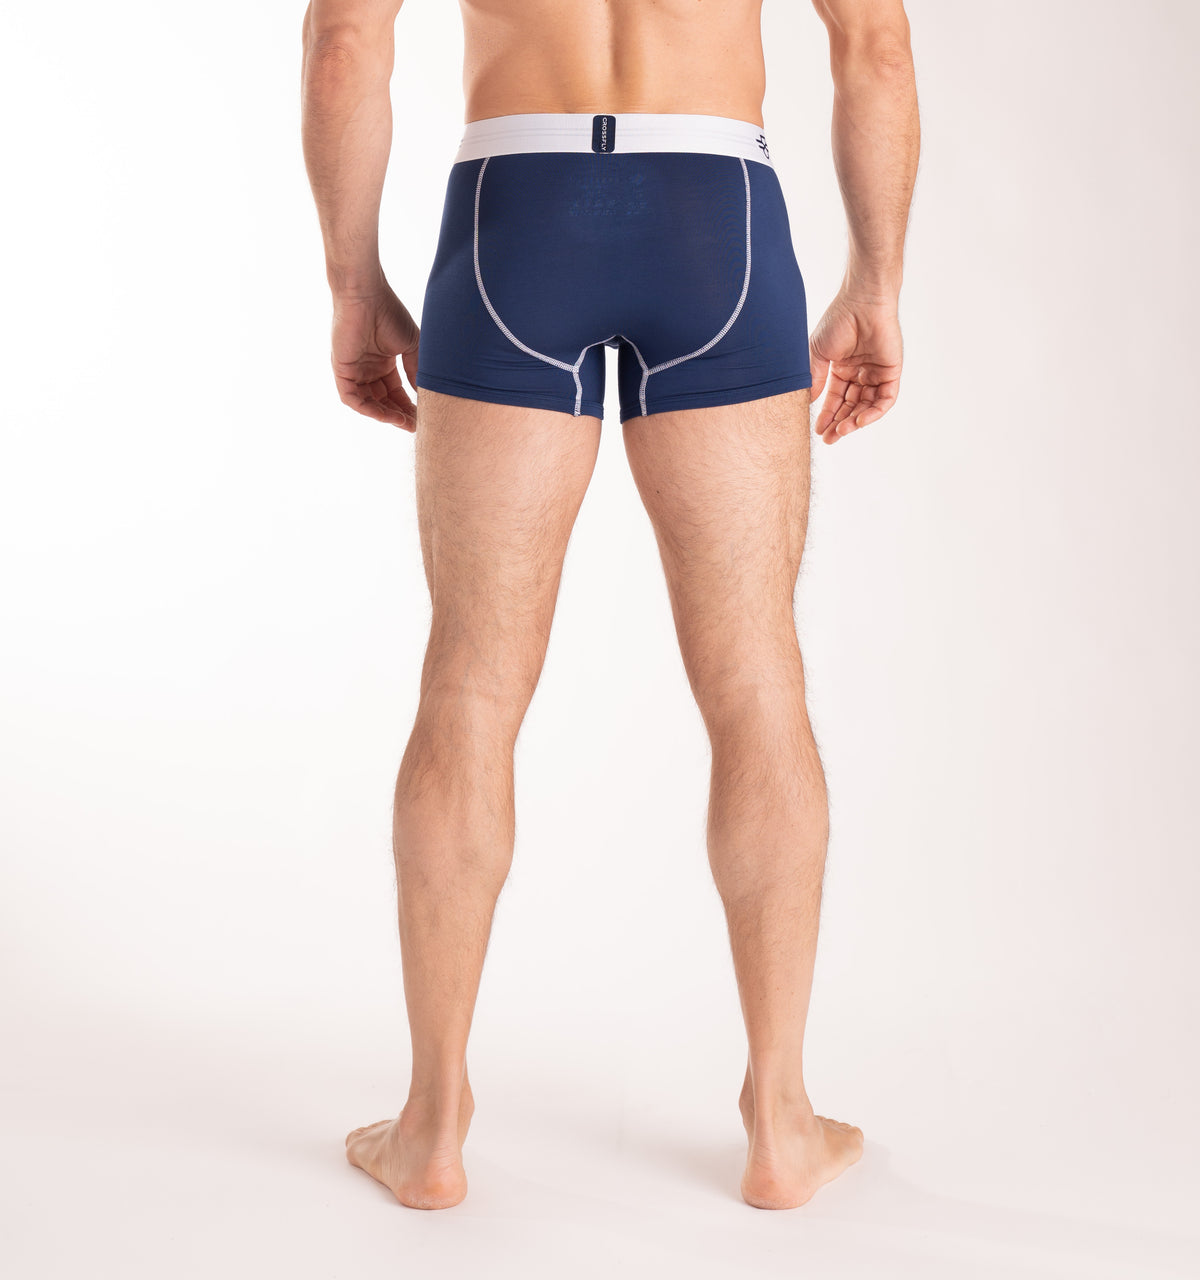 Crossfly men&#39;s IKON X 3&quot; navy / white trunks from the Everyday series, featuring X-Fly and Coccoon internal pocket support.